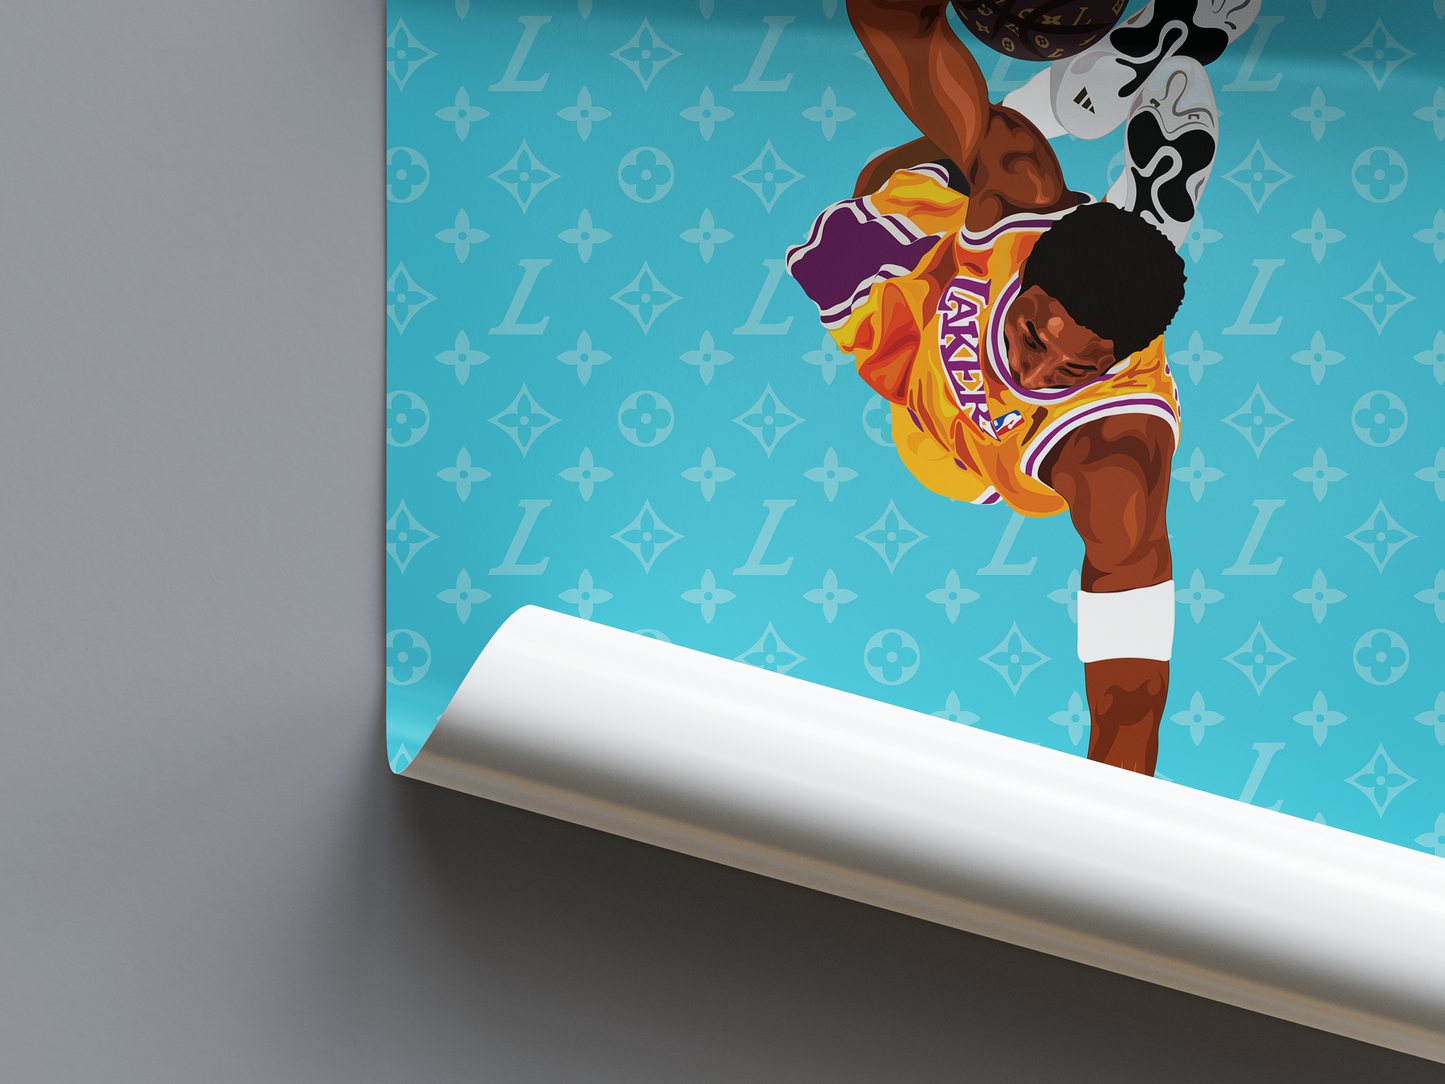 Premium & Sustainable Kobe Bryant Lakers Louis Vuitton Poster Print. Hand crafted in the UK from the highest quality paper, created with sustainable FSC paper. Texturised inks, brings the poster to life. Available to purchase with a Polcore Recycled Plastic Frame with Perspex screening to let your print do the talking.